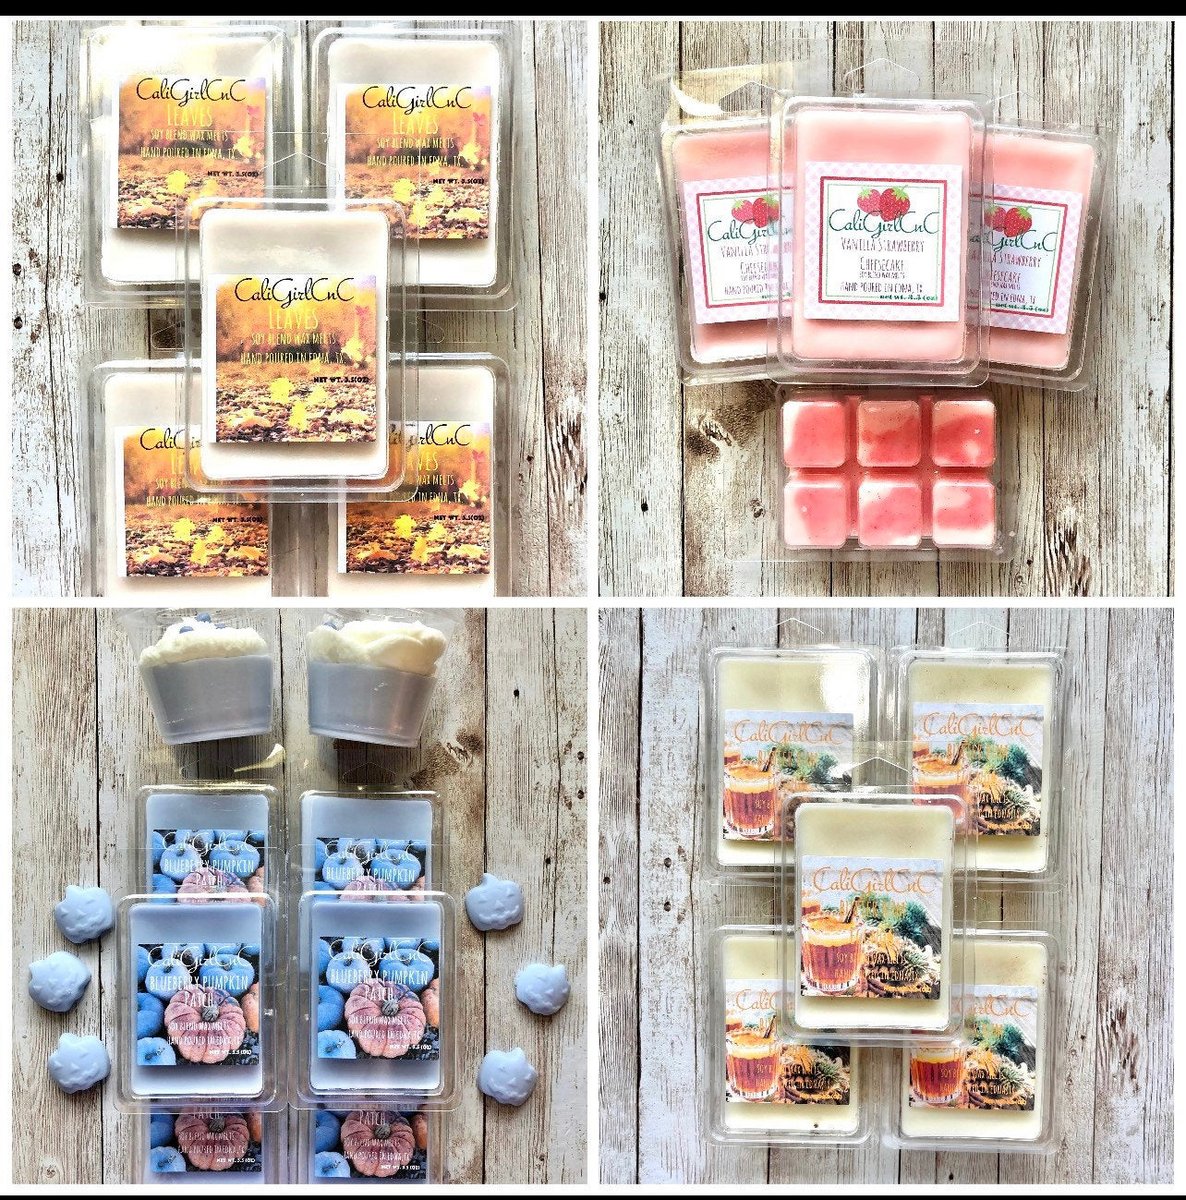 Buy Wax Melts, Strong Scented Soy Wax Melts, Hand Poured Wax Melts